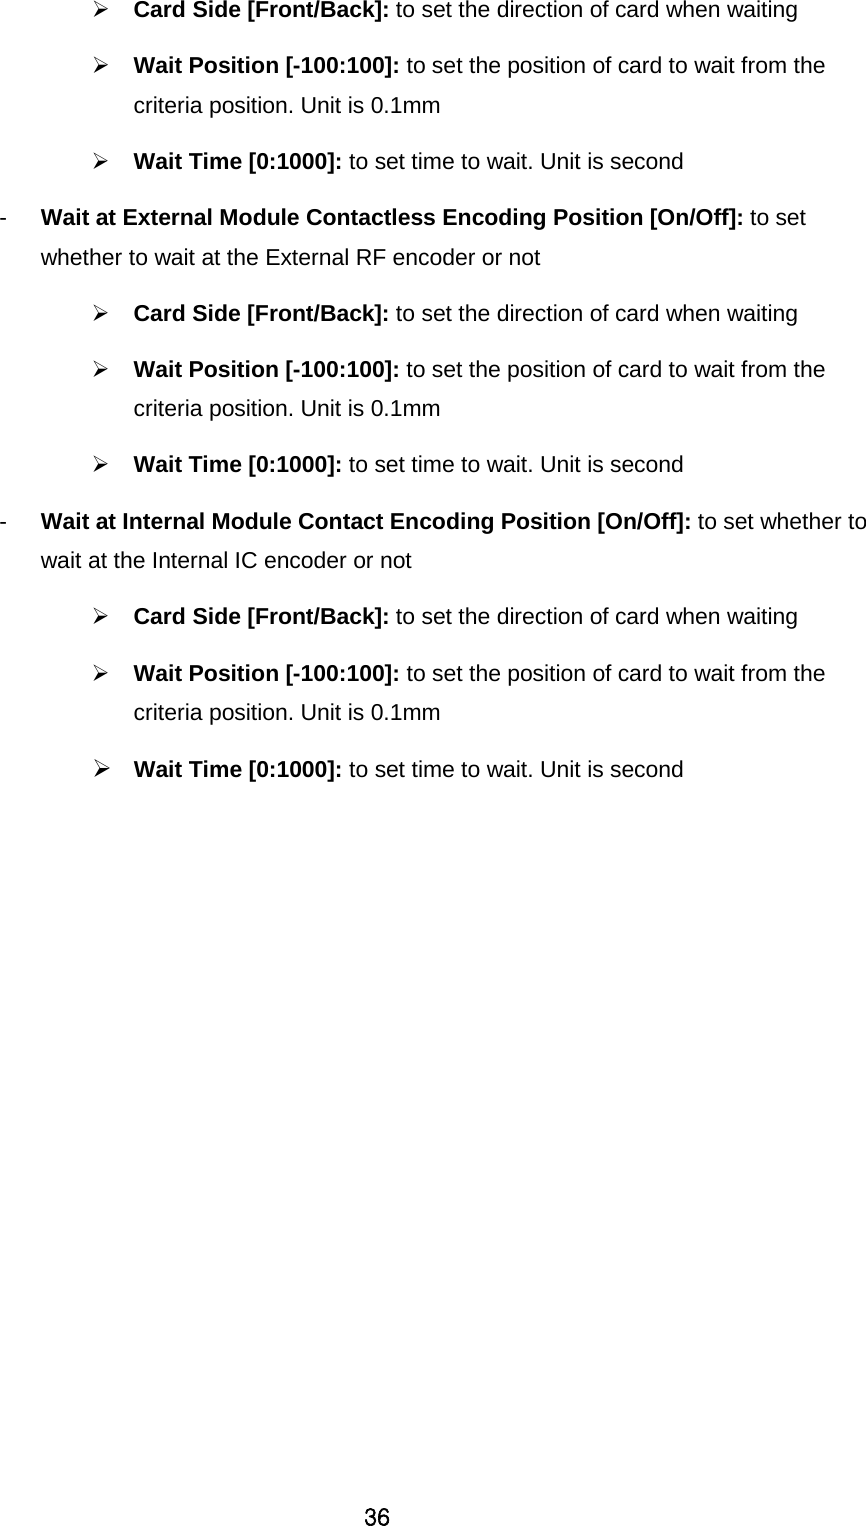 36  Card Side [Front/Back]: to set the direction of card when waiting    Wait Position [-100:100]: to set the position of card to wait from the criteria position. Unit is 0.1mm  Wait Time [0:1000]: to set time to wait. Unit is second -  Wait at External Module Contactless Encoding Position [On/Off]: to set whether to wait at the External RF encoder or not  Card Side [Front/Back]: to set the direction of card when waiting    Wait Position [-100:100]: to set the position of card to wait from the criteria position. Unit is 0.1mm  Wait Time [0:1000]: to set time to wait. Unit is second -  Wait at Internal Module Contact Encoding Position [On/Off]: to set whether to wait at the Internal IC encoder or not  Card Side [Front/Back]: to set the direction of card when waiting    Wait Position [-100:100]: to set the position of card to wait from the criteria position. Unit is 0.1mm  Wait Time [0:1000]: to set time to wait. Unit is second 